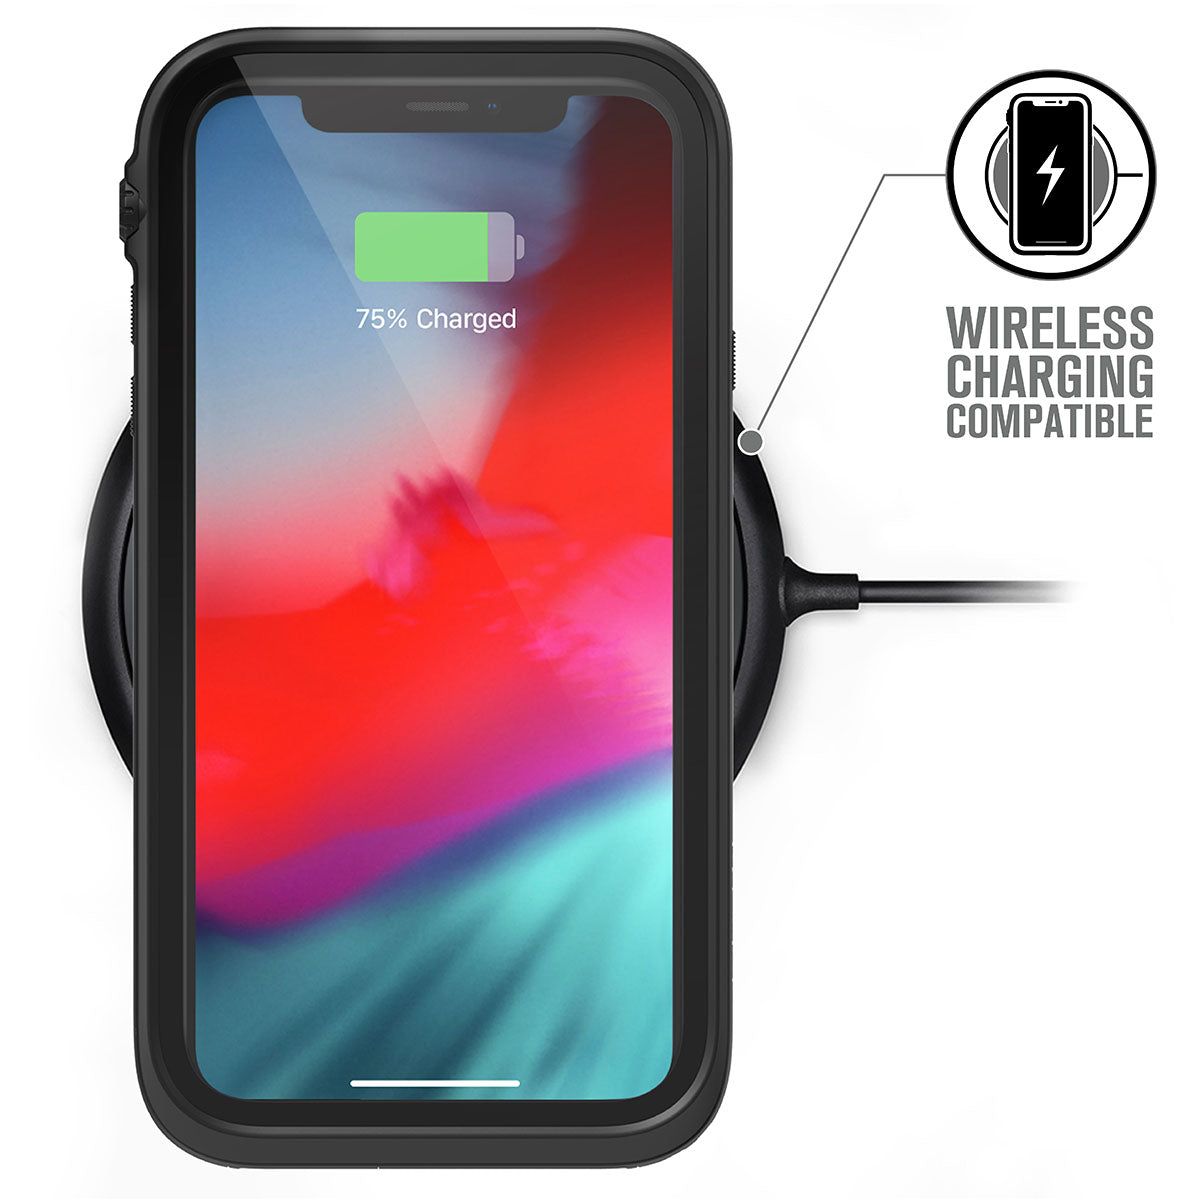 Catalyst iphone x/xr/xs/xs max waterproof case xr showing wireless charging in stealth black